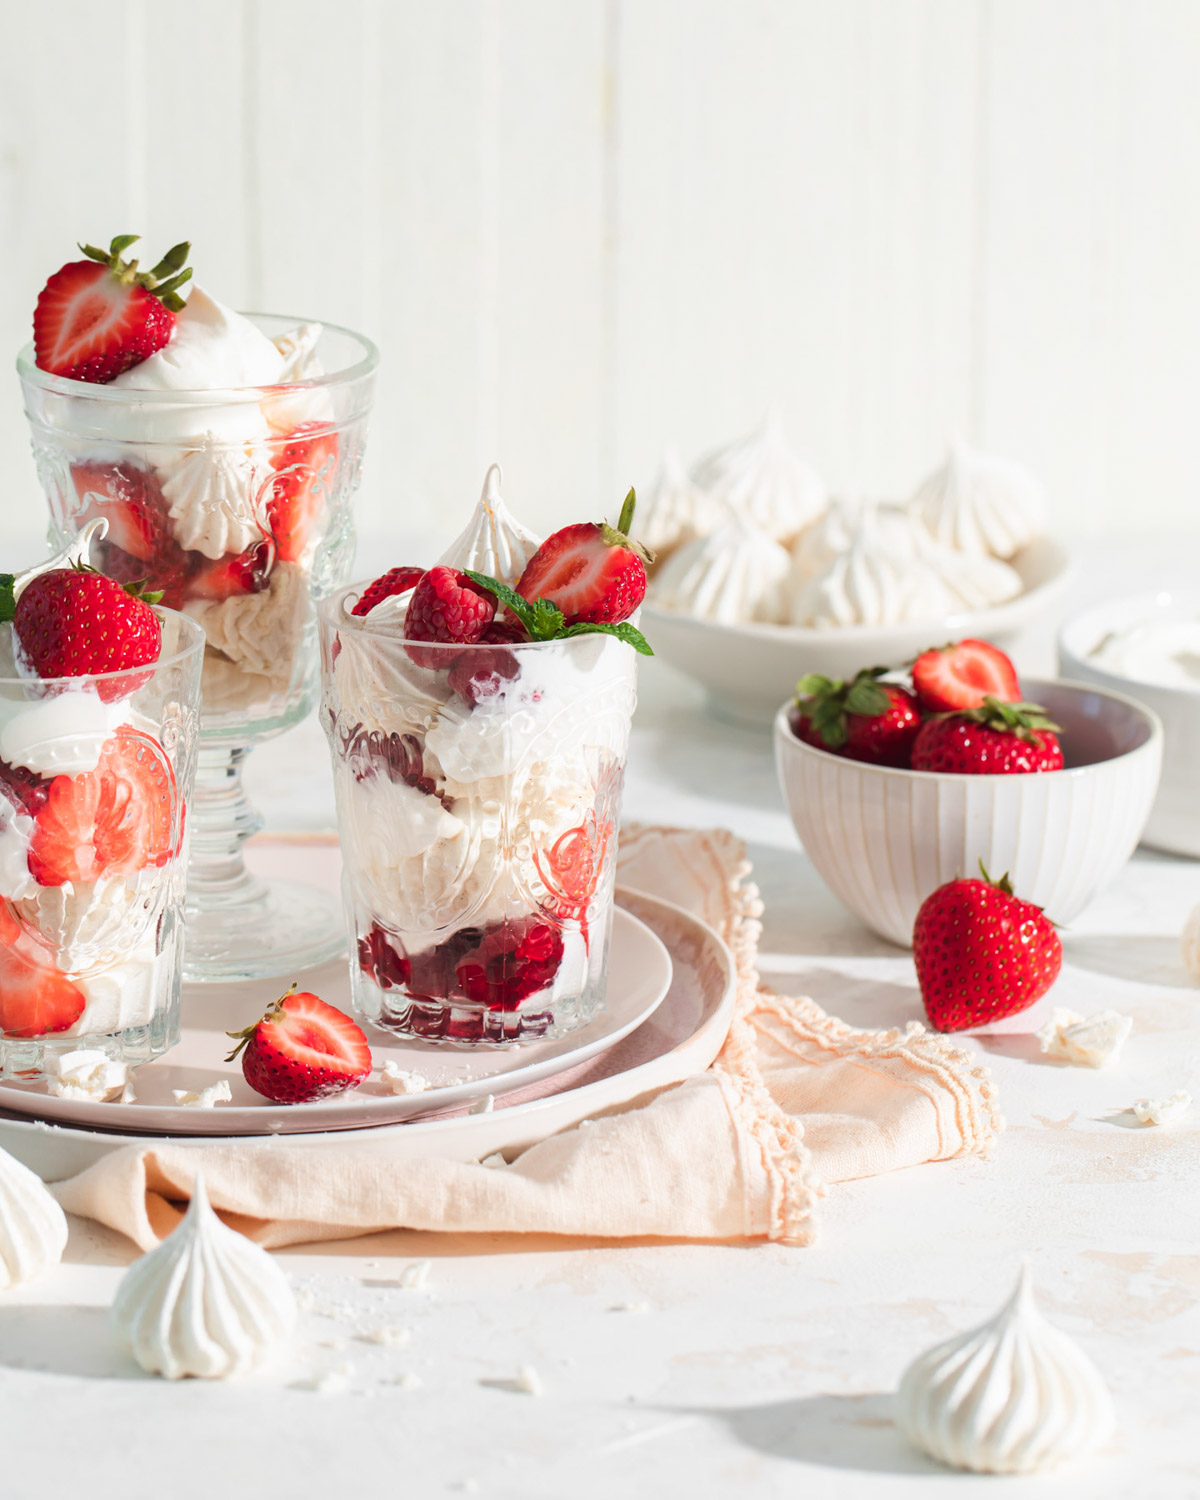 Small glasses with layers of crushed meringue, whipped cream, and fresh berries inside